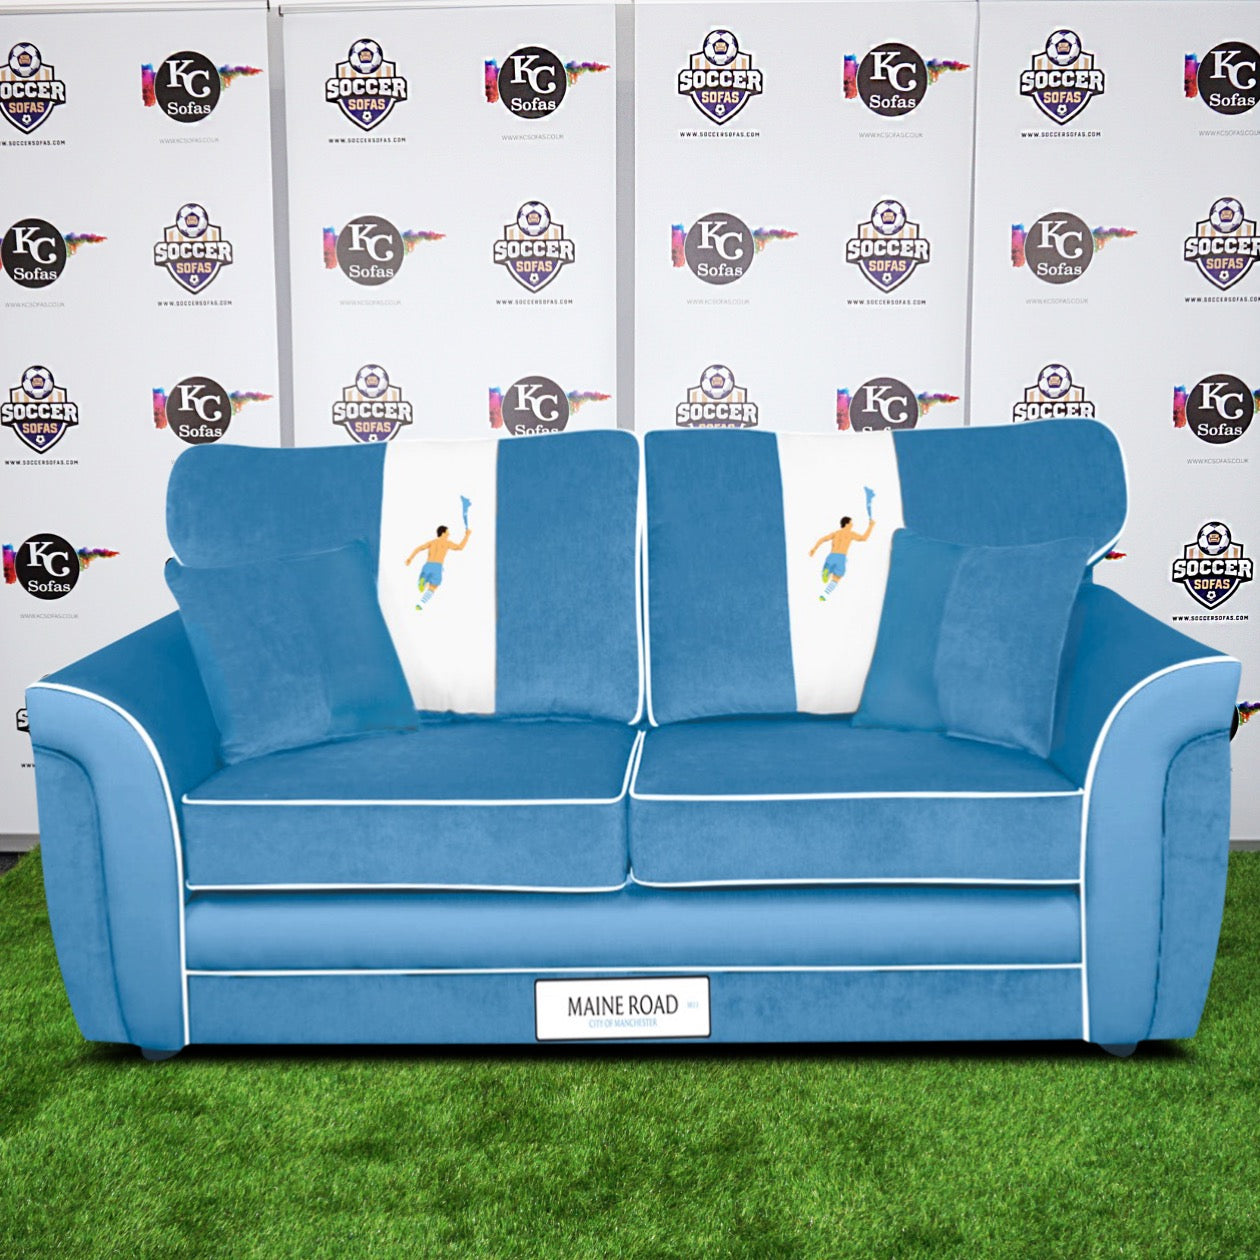 Maine Road 3 Seater Sofa (Manchester City FC)